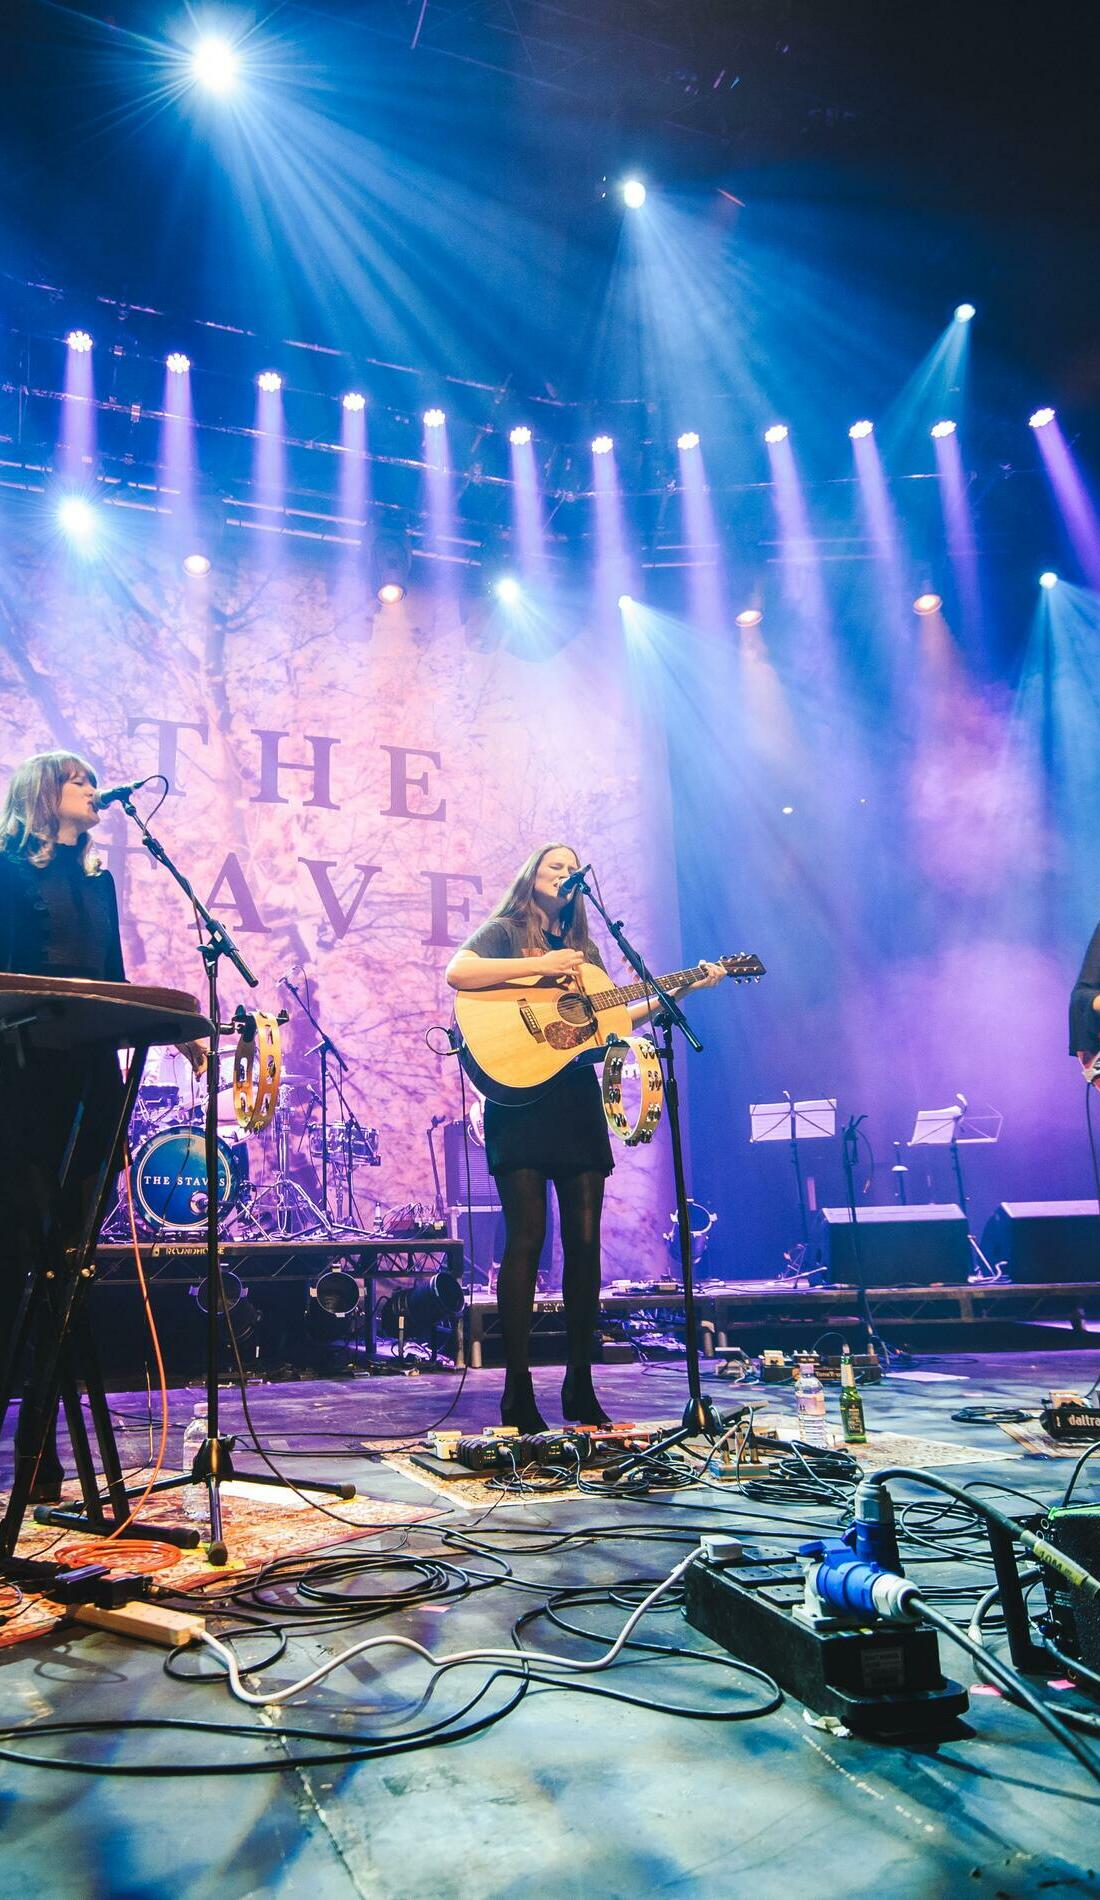 A The Staves live event